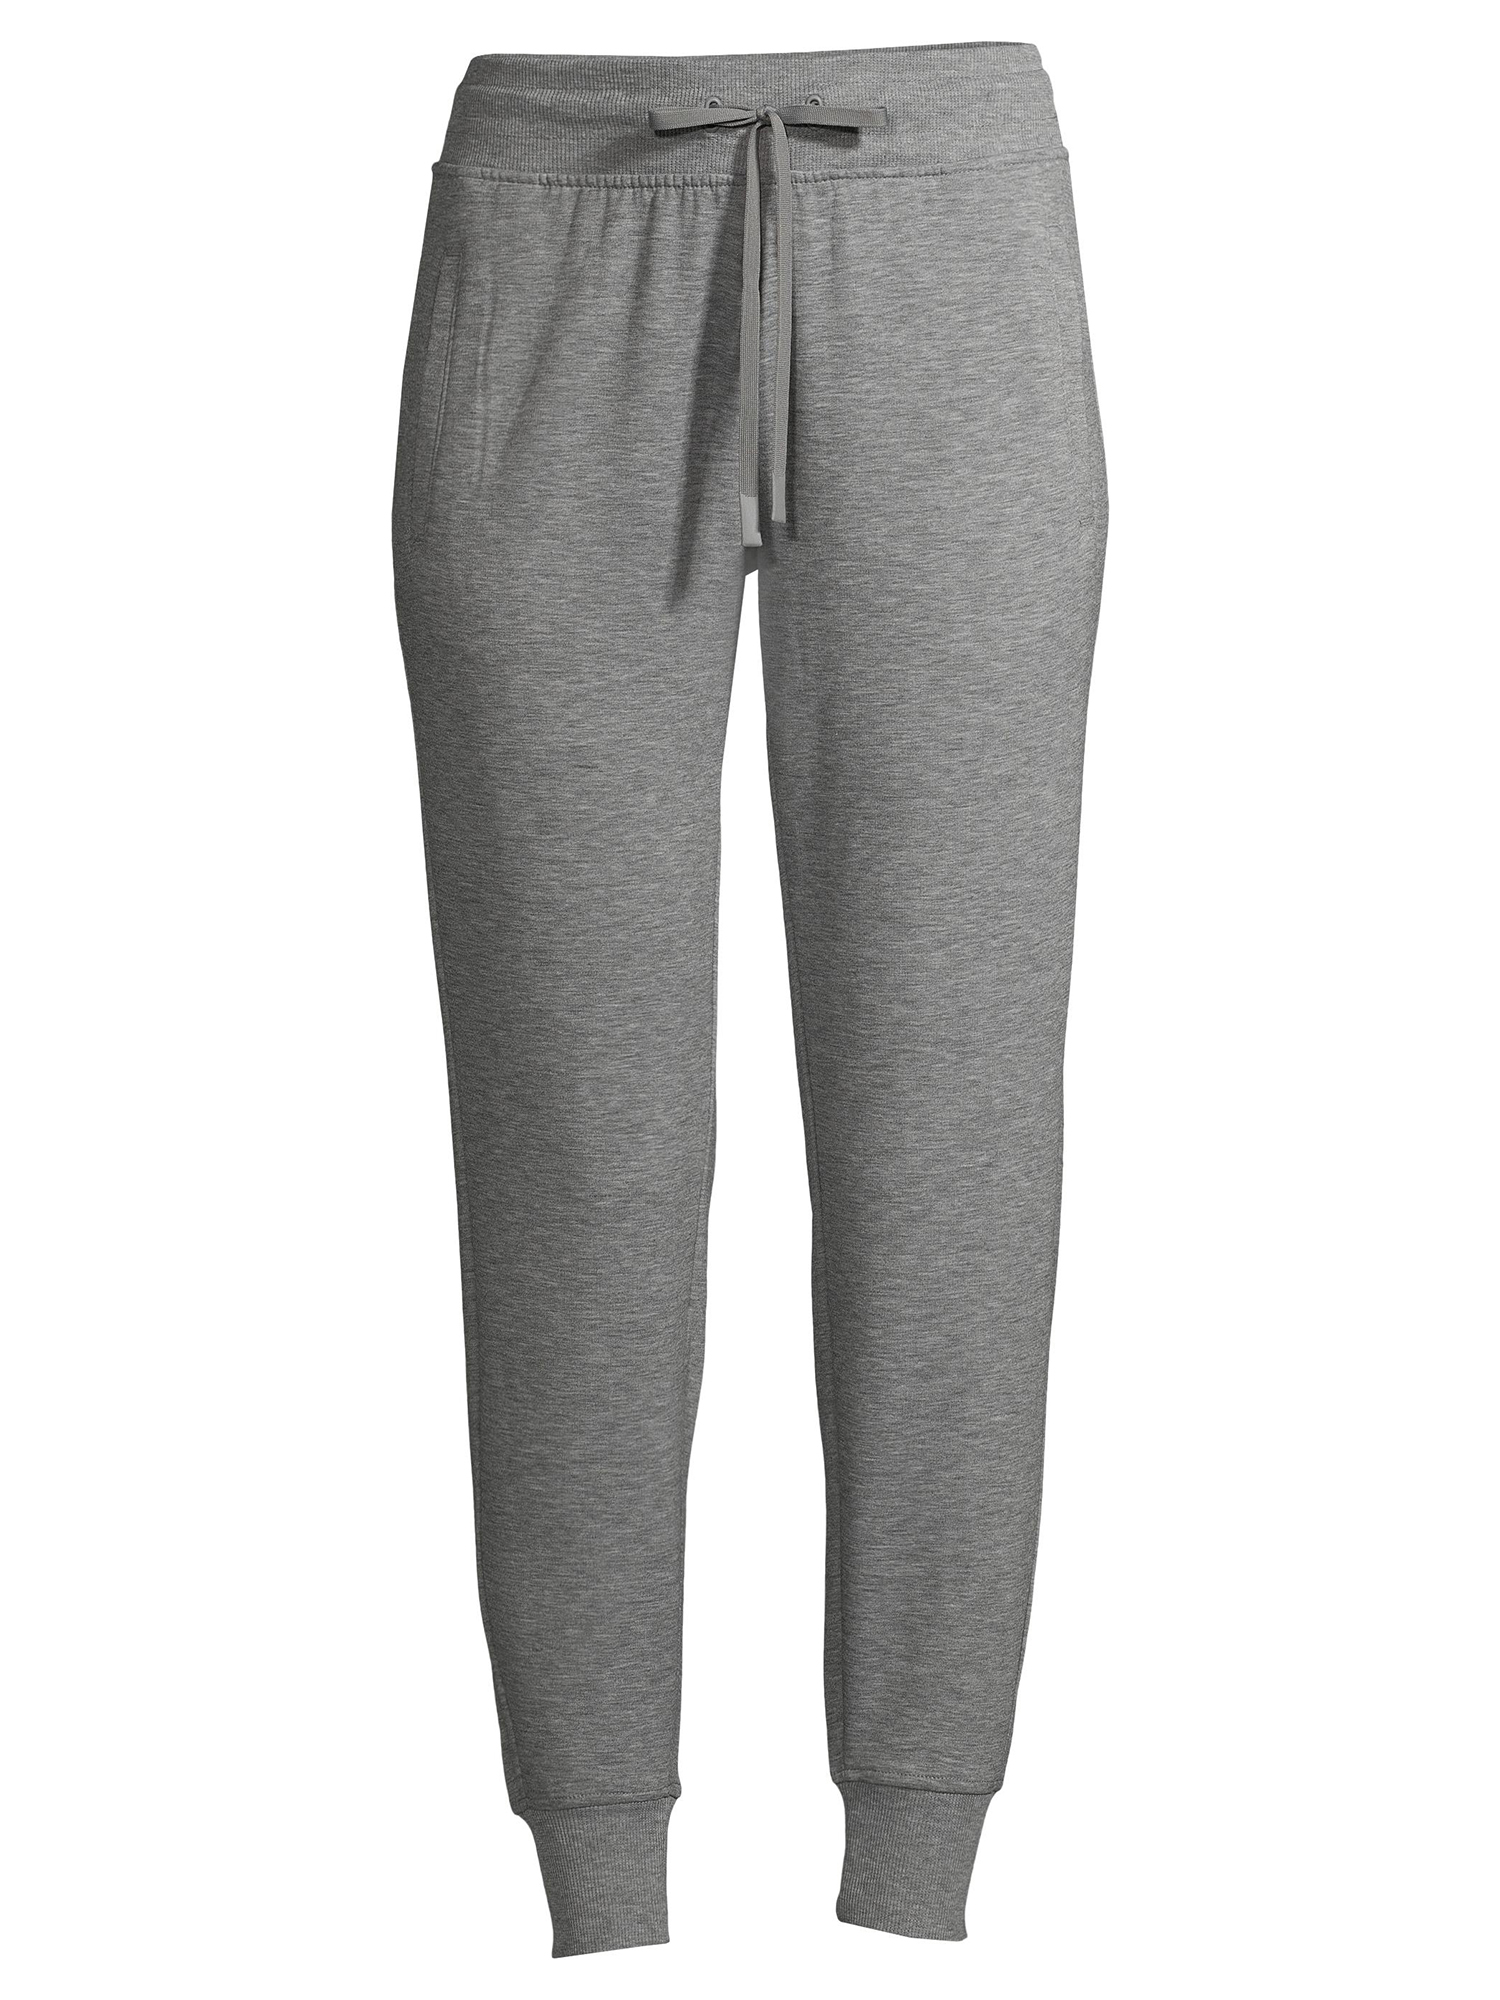 Athletic Works Women's Athleisure Soft Jogger Pants - image 3 of 6